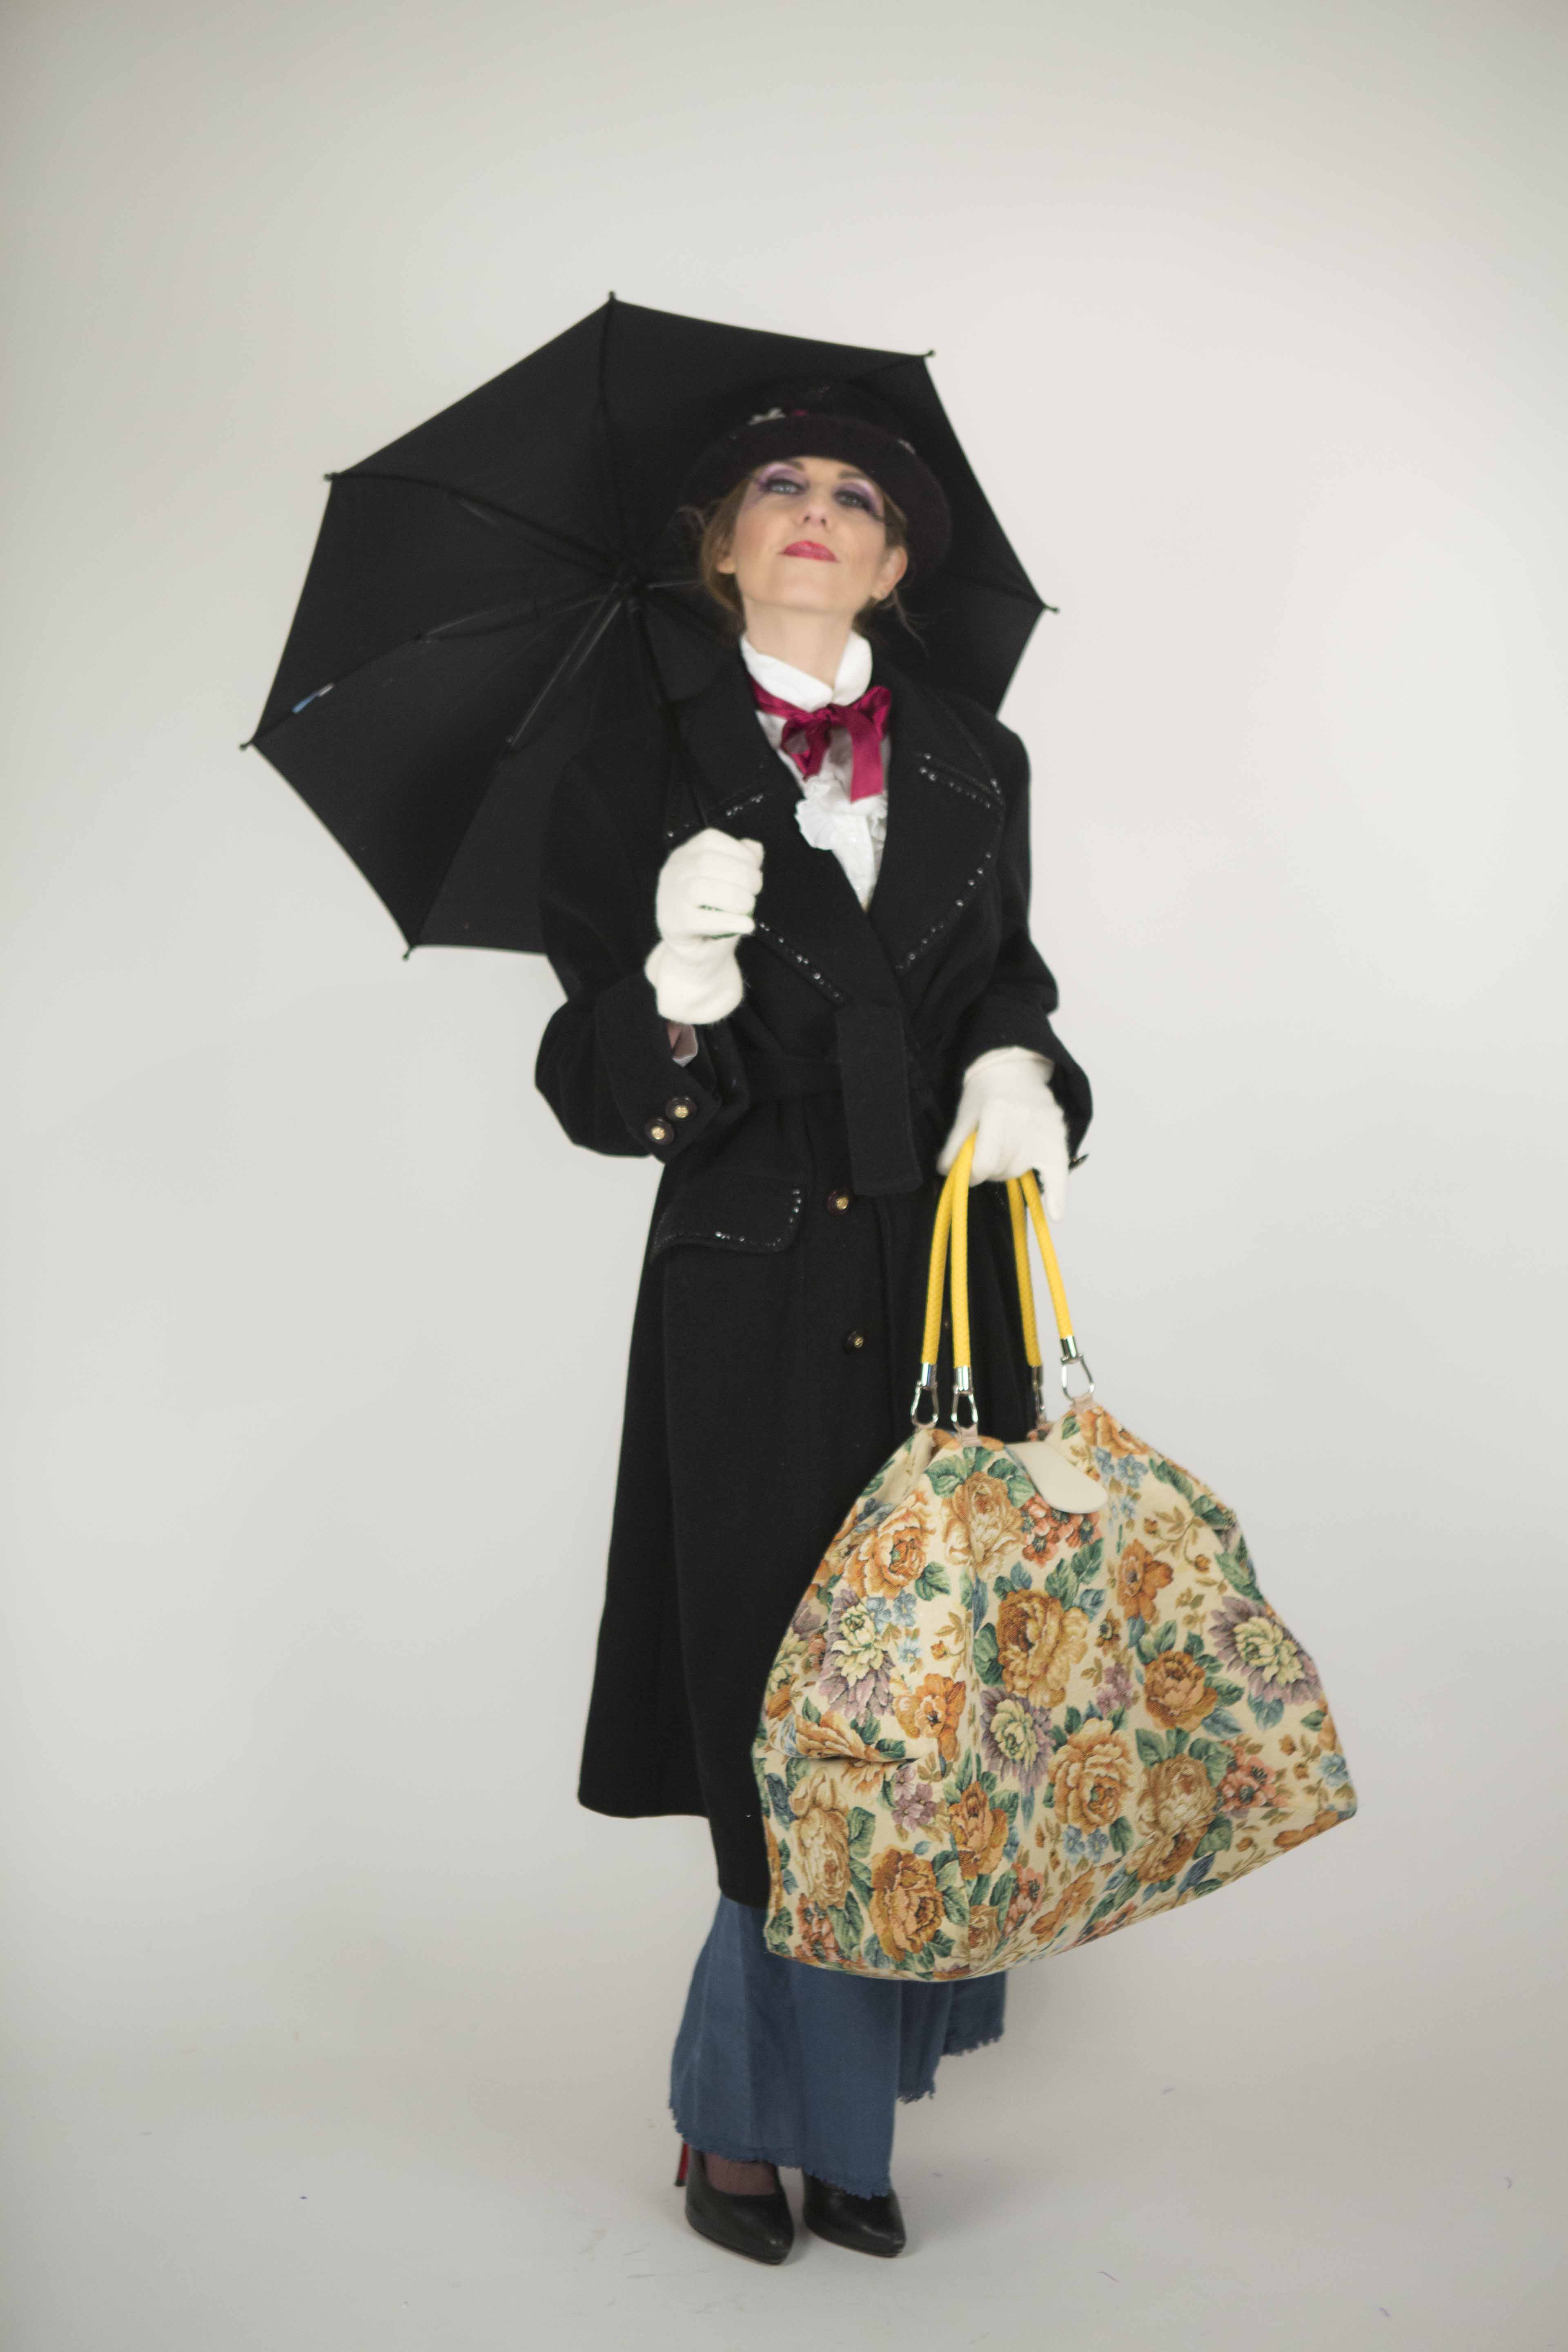 Blondy Violet _The True Story of Mary Poppins - Rights Reserverd: Cecilia Pratizzoli